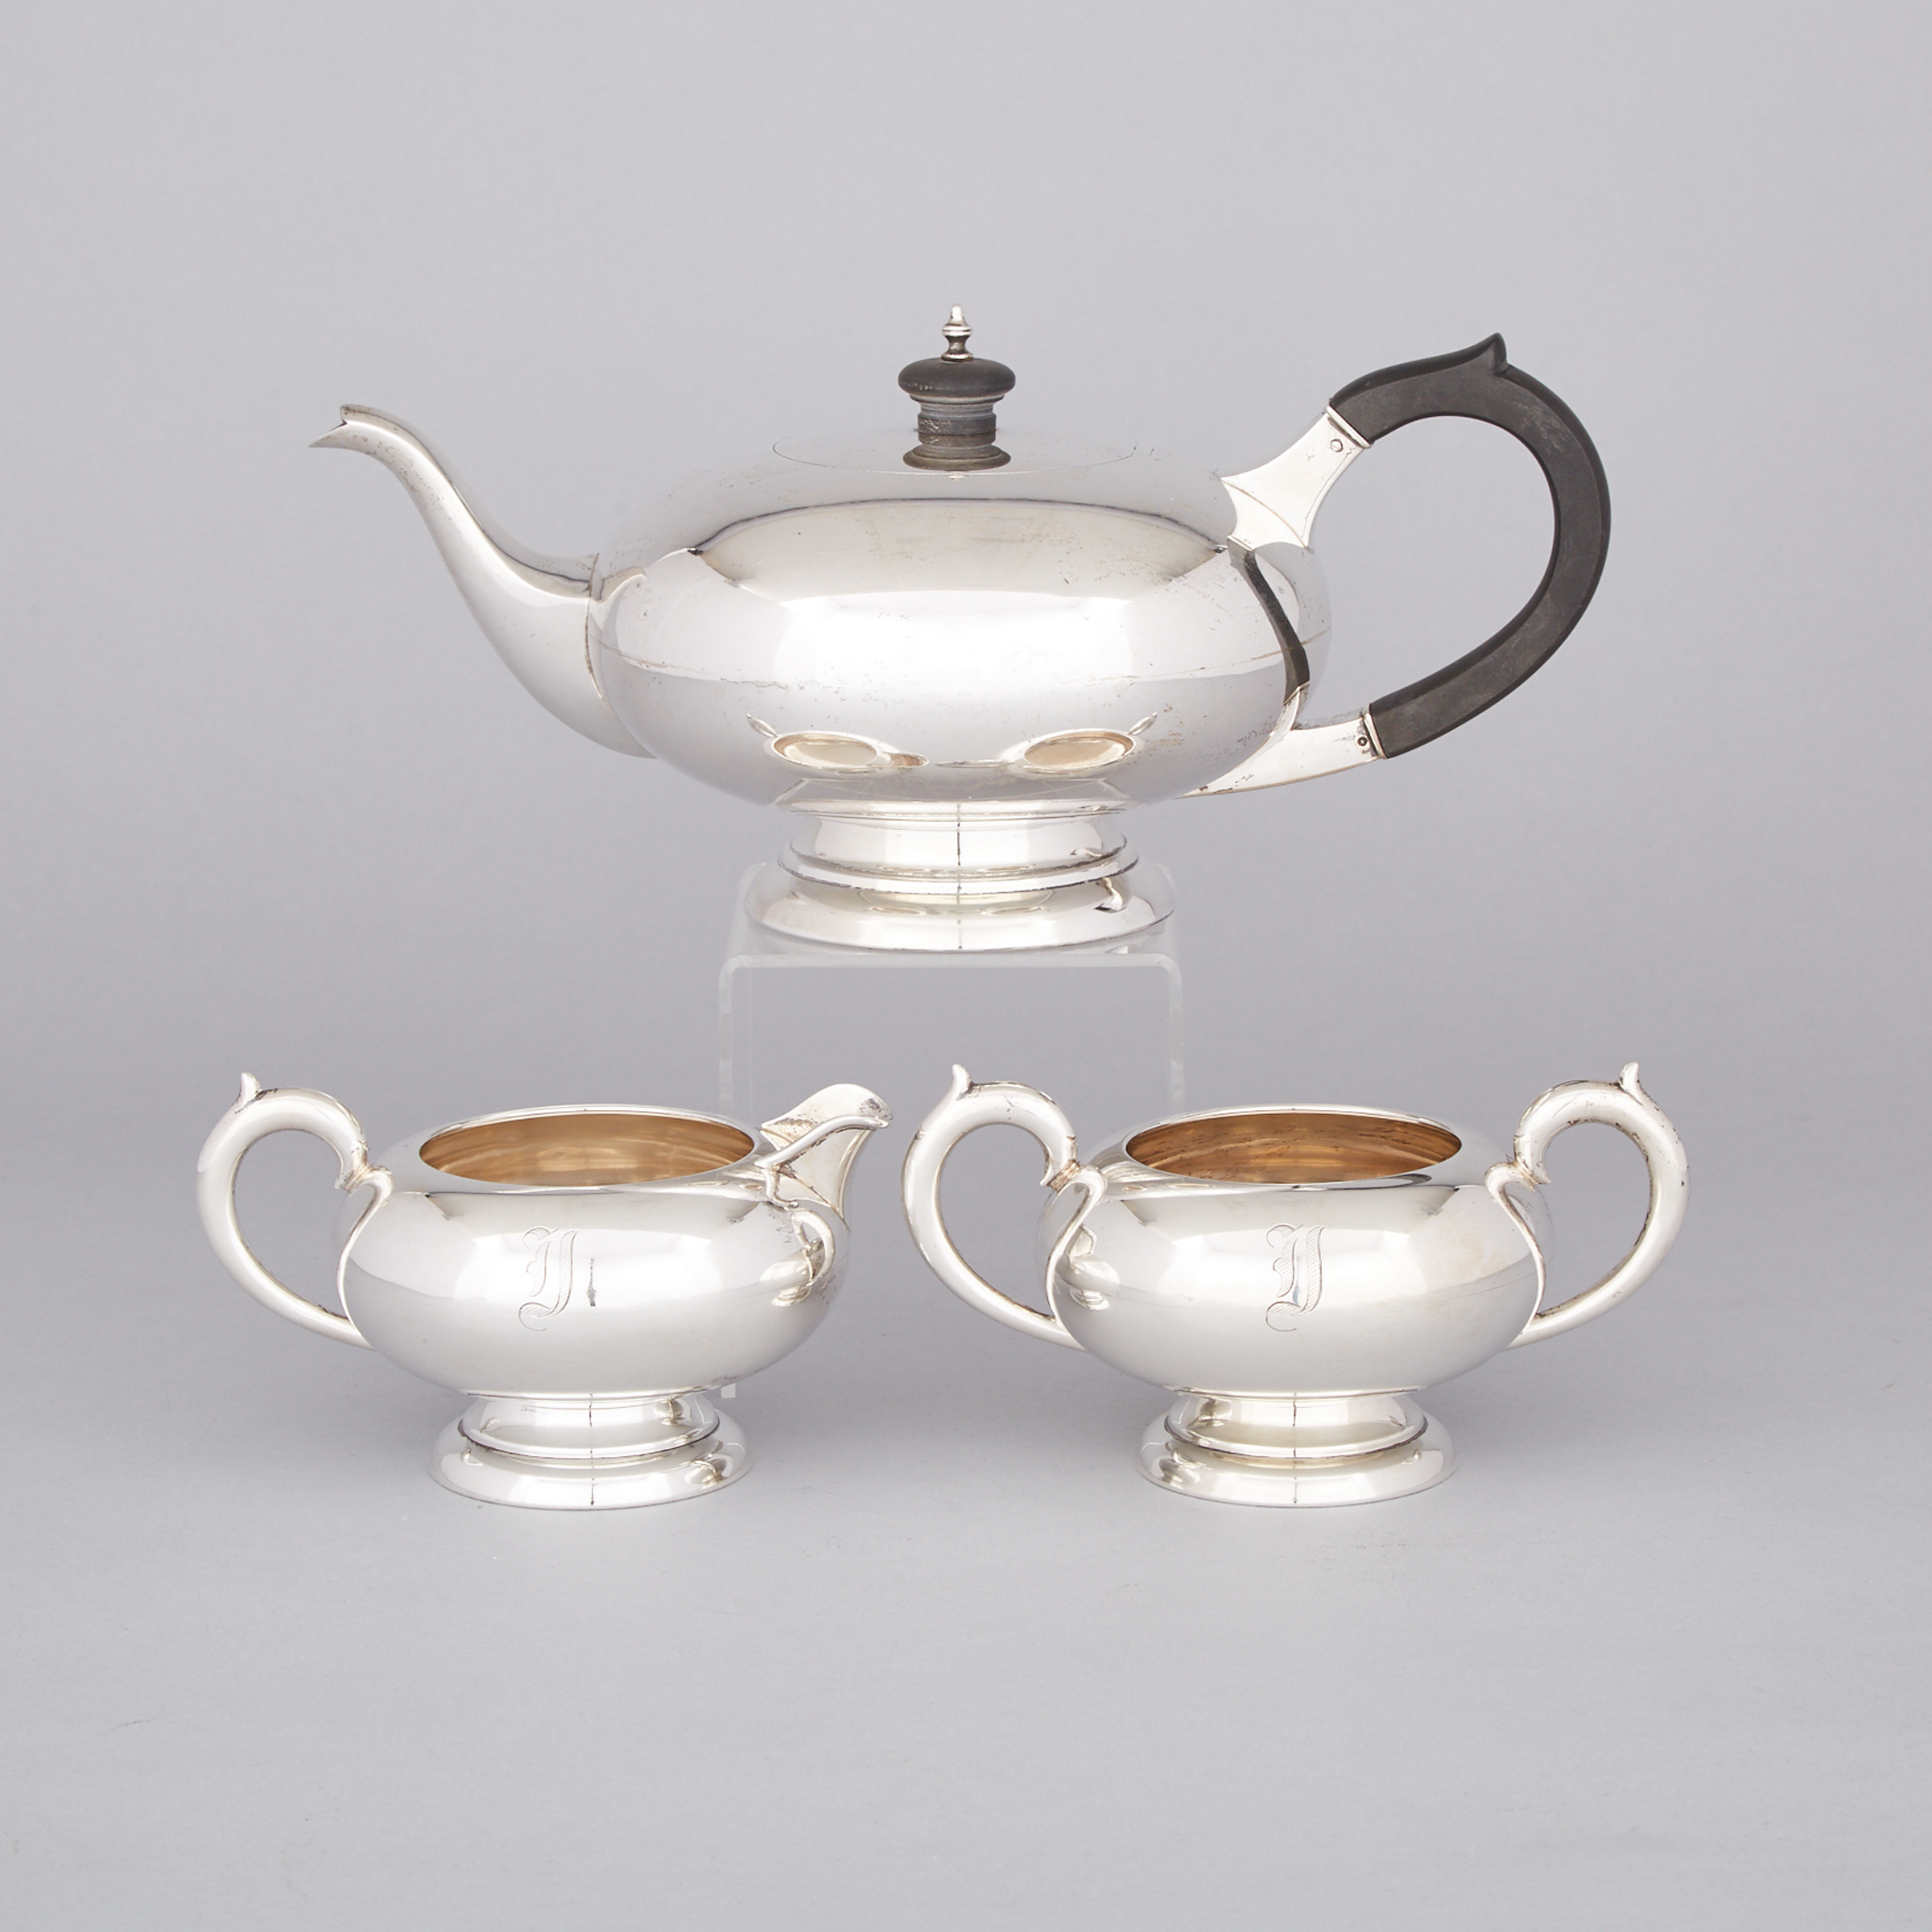 Canadian Silver Tea Service, Roden Brothers, Toronto, Ont., early 20th century